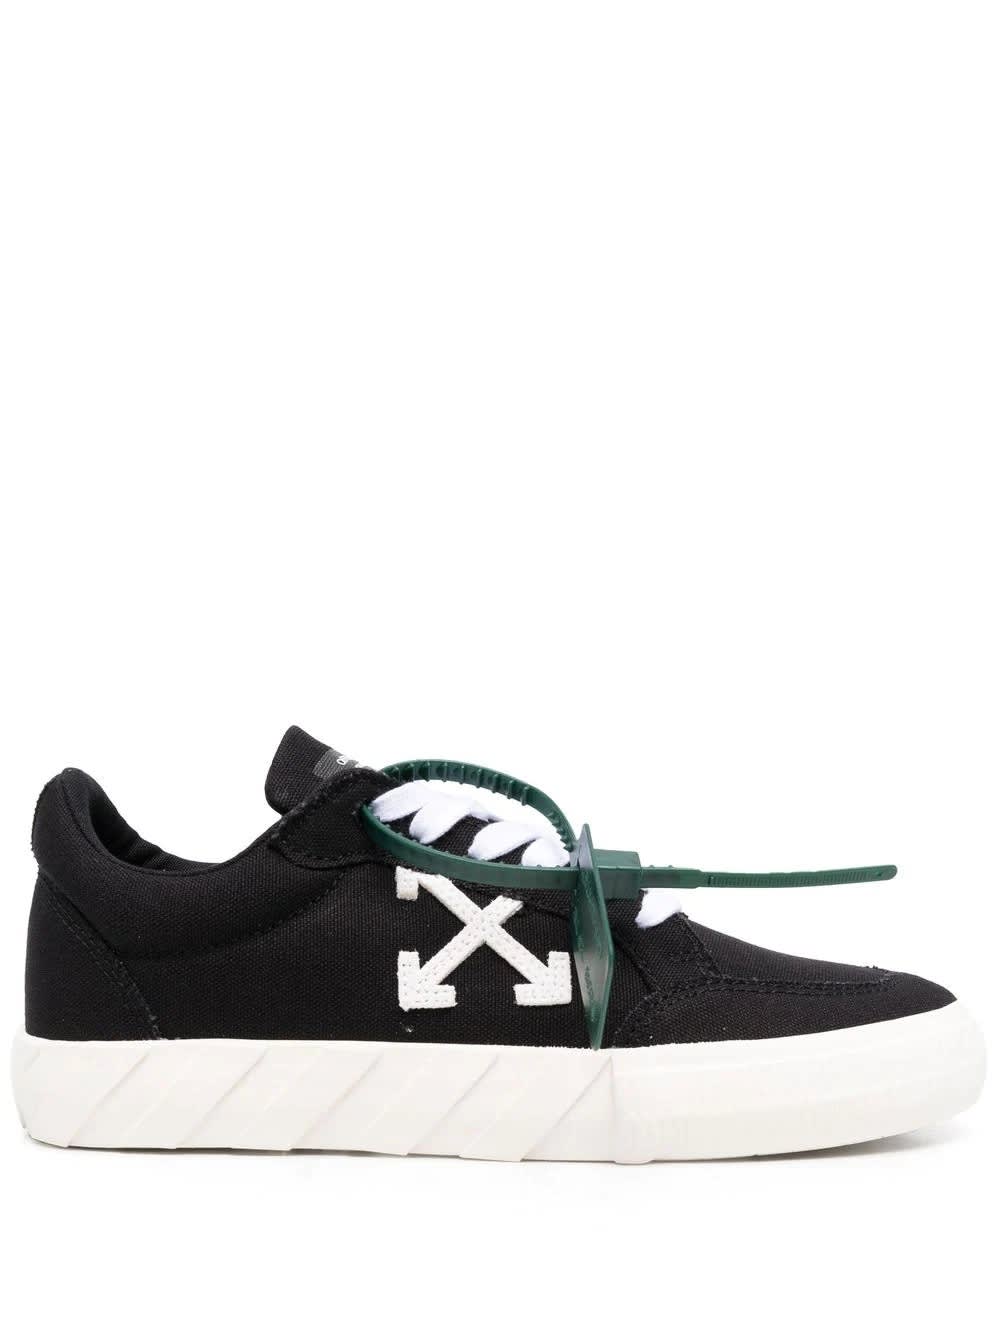 OFF-WHITE BLACK VULCANIZED LOW SNEAKERS